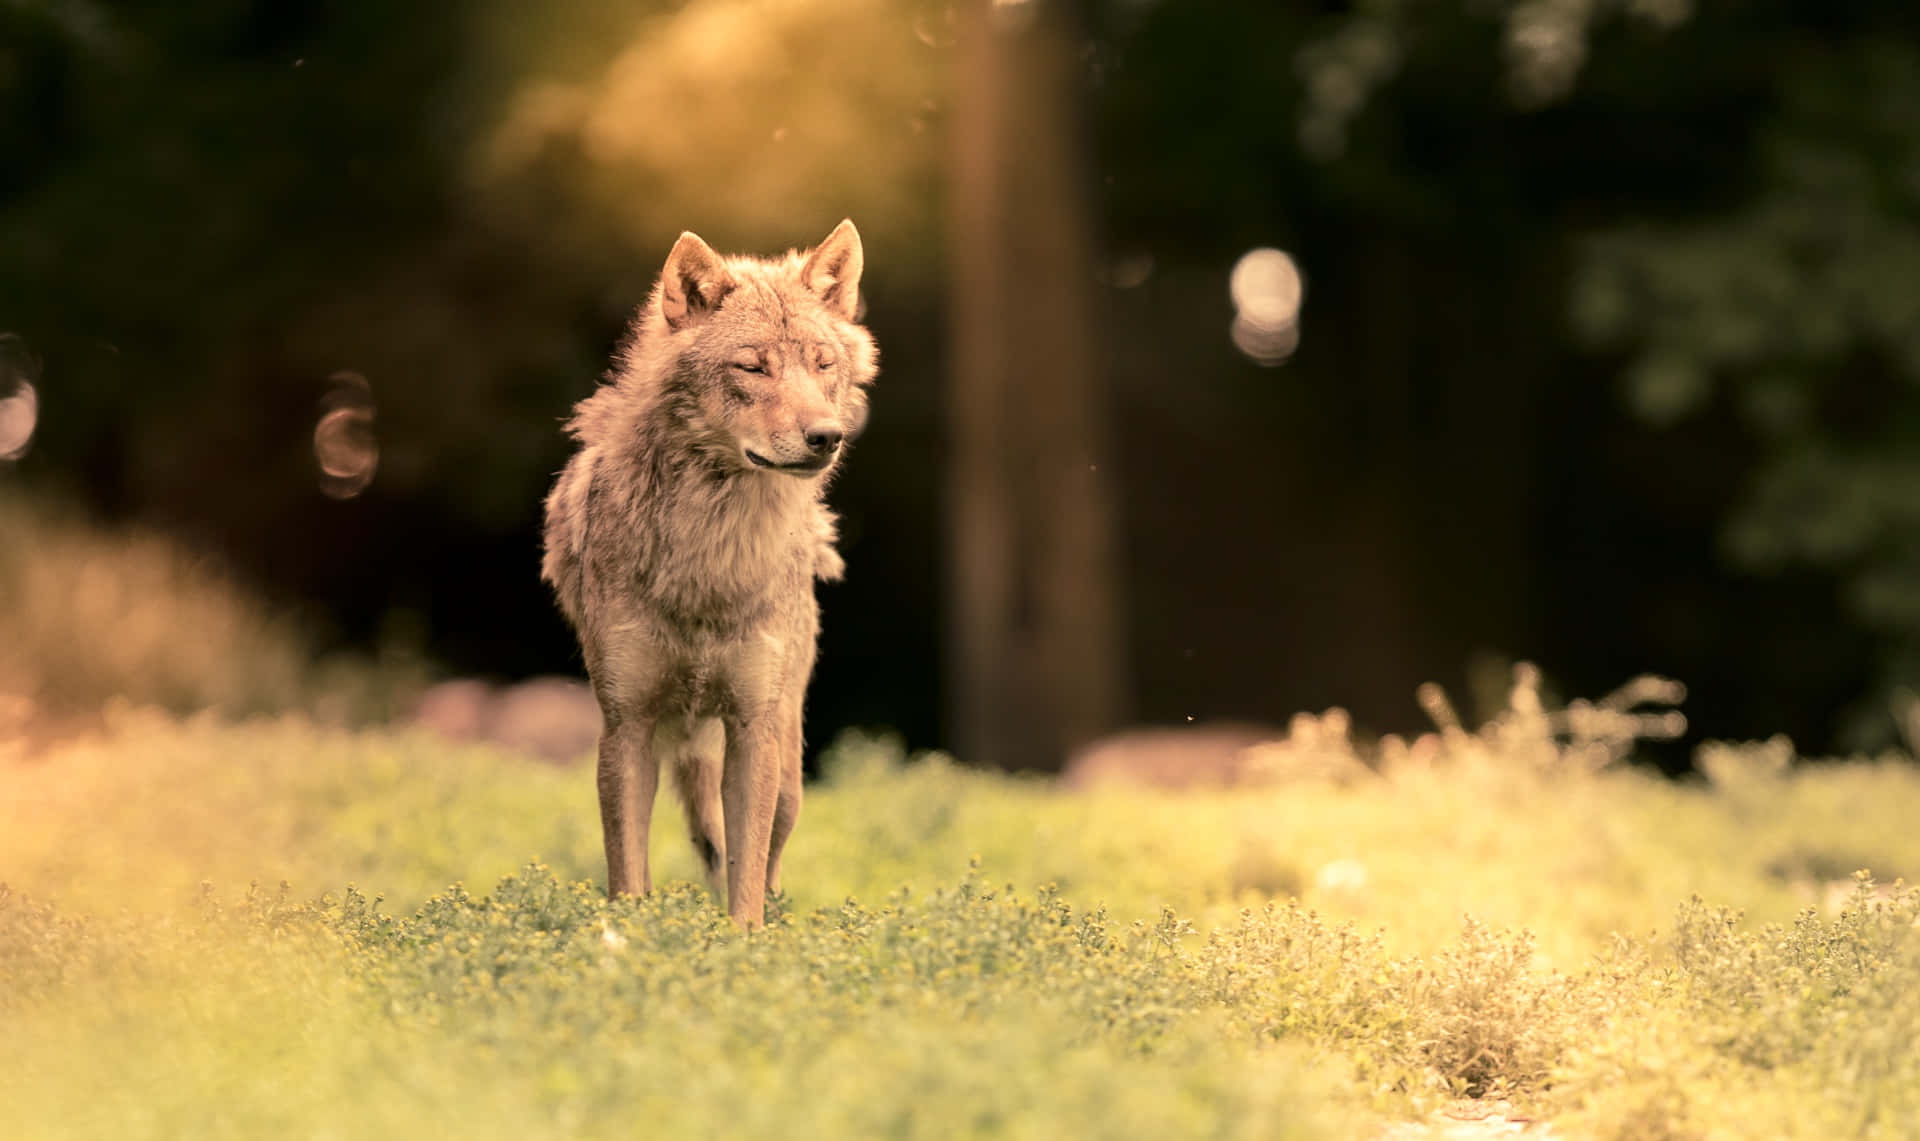 Adorable Wolf Pup In Its Natural Habitat Background